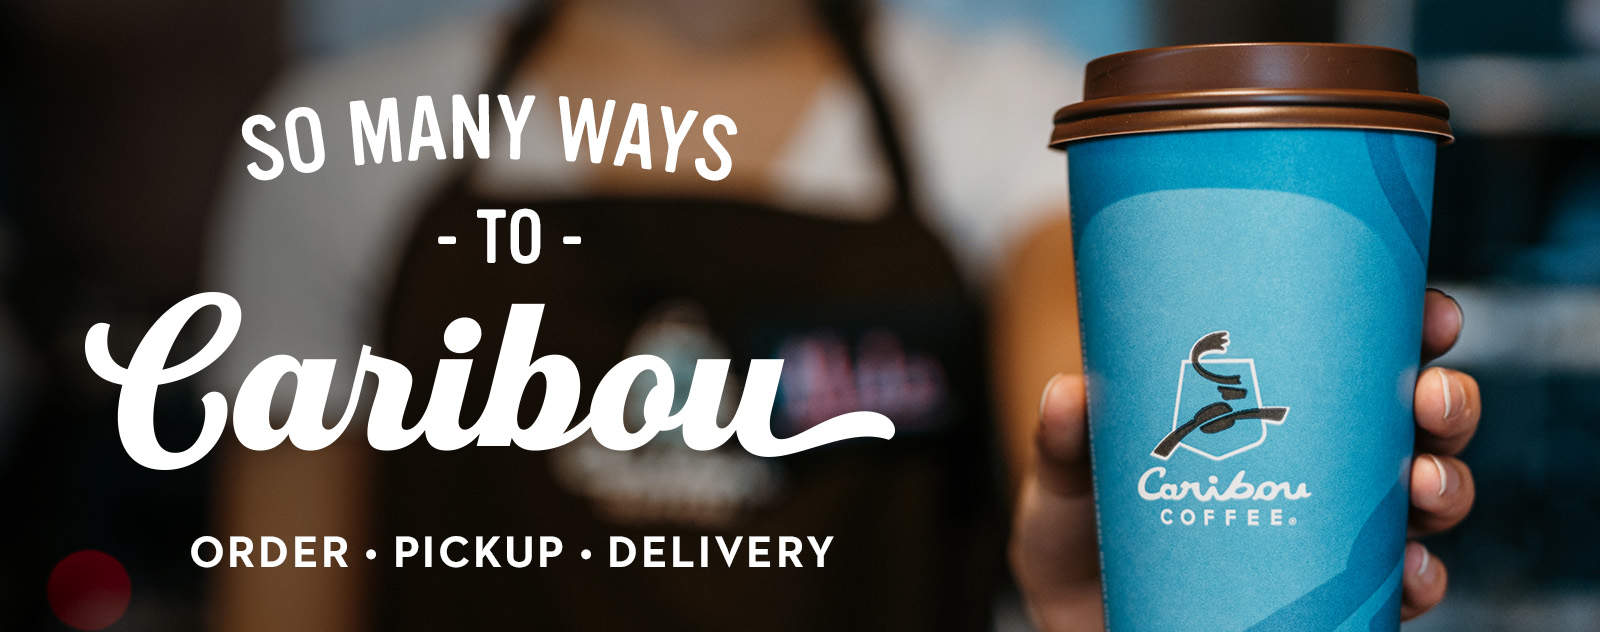 So many ways to Caribou. Order, pickup, delivery